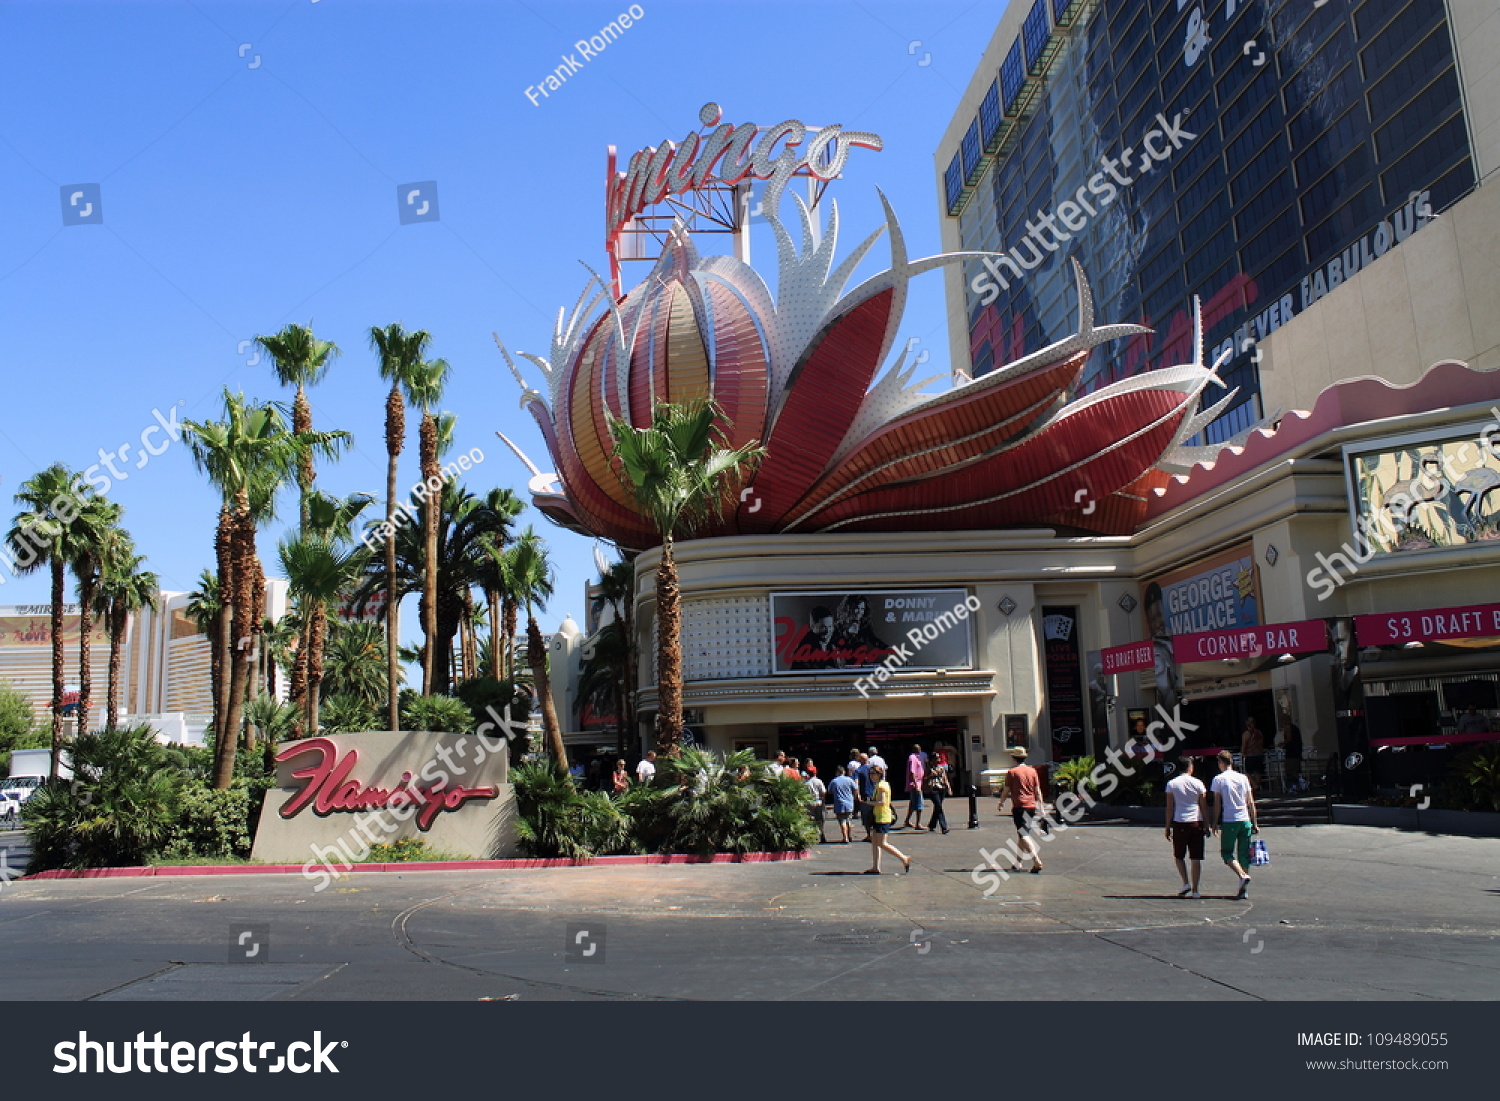 Las Vegas - July 3: Flamingo Hotel And Casino On July 3, 2012 On The ...